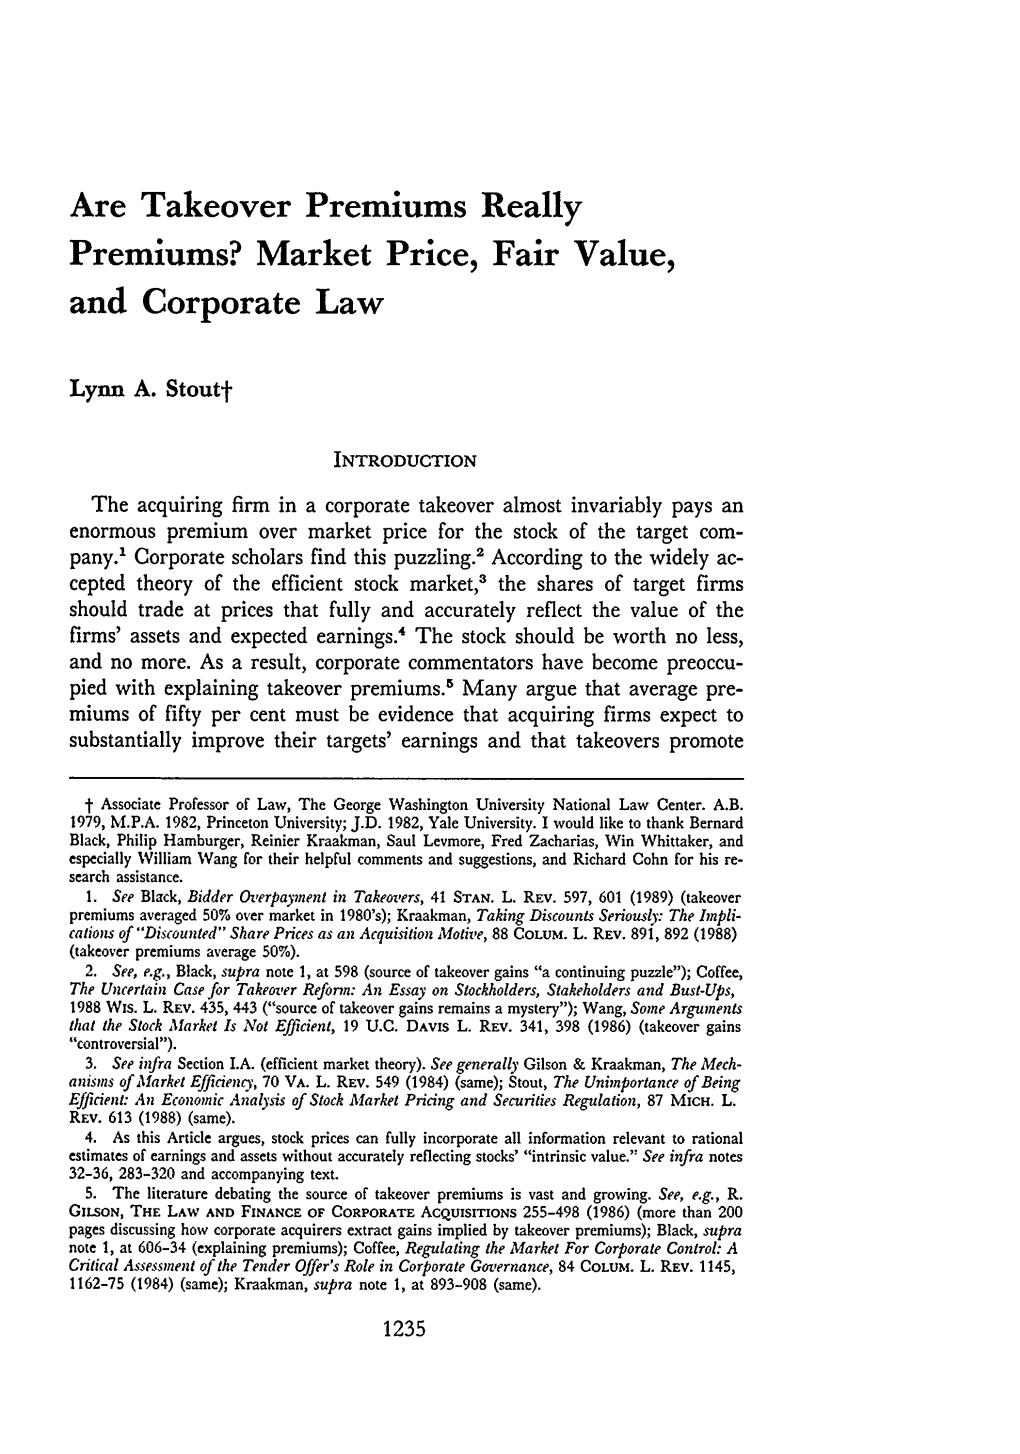 Are Takeover Premiums Really Premiums? Market Price, Fair Value, and Corporate Law